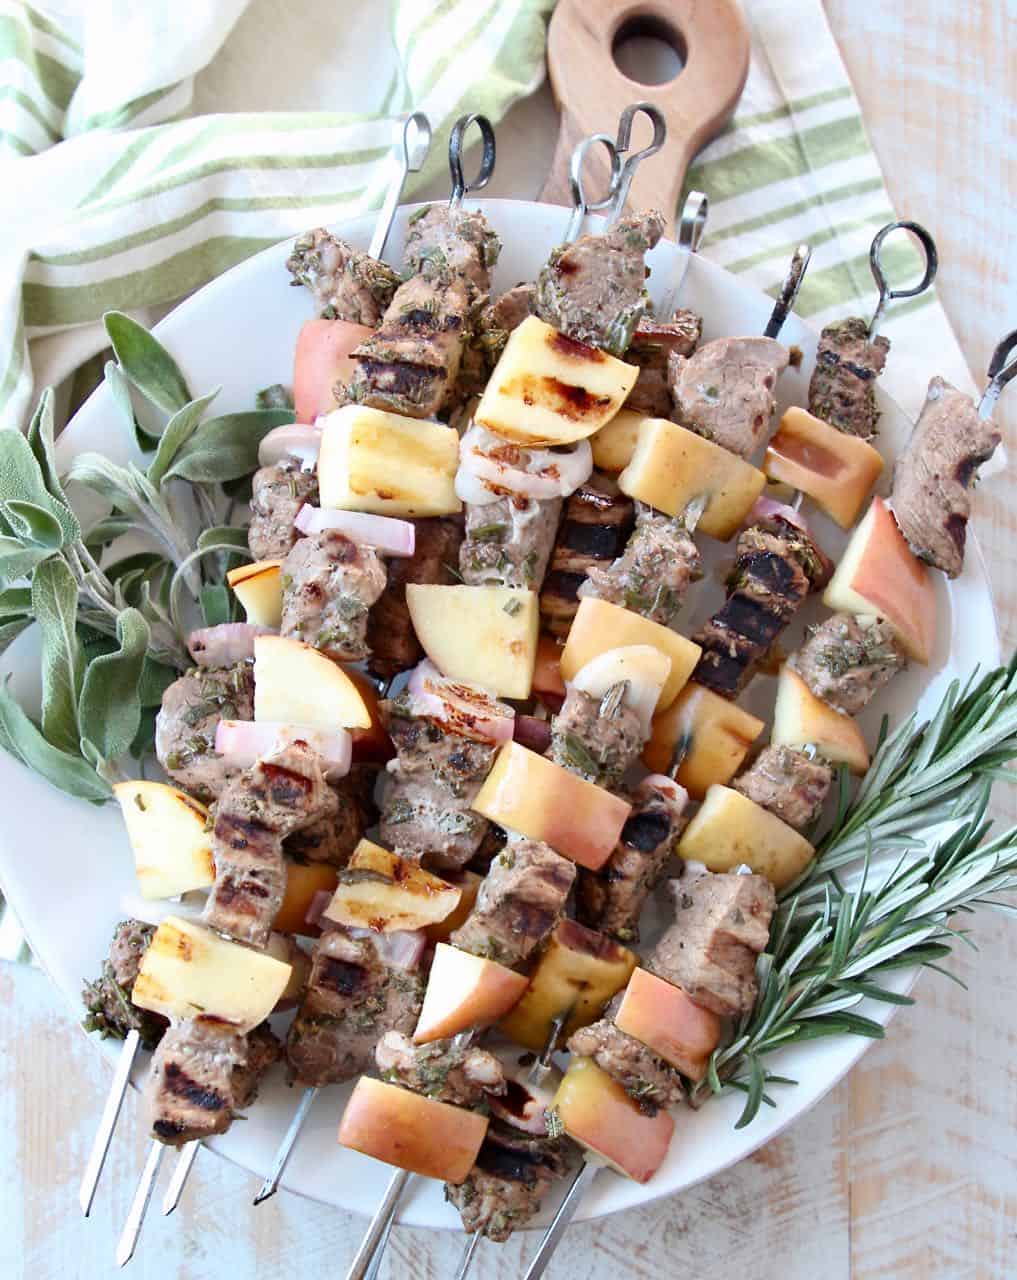 Pork skewers stacked up on plate with fresh herbs